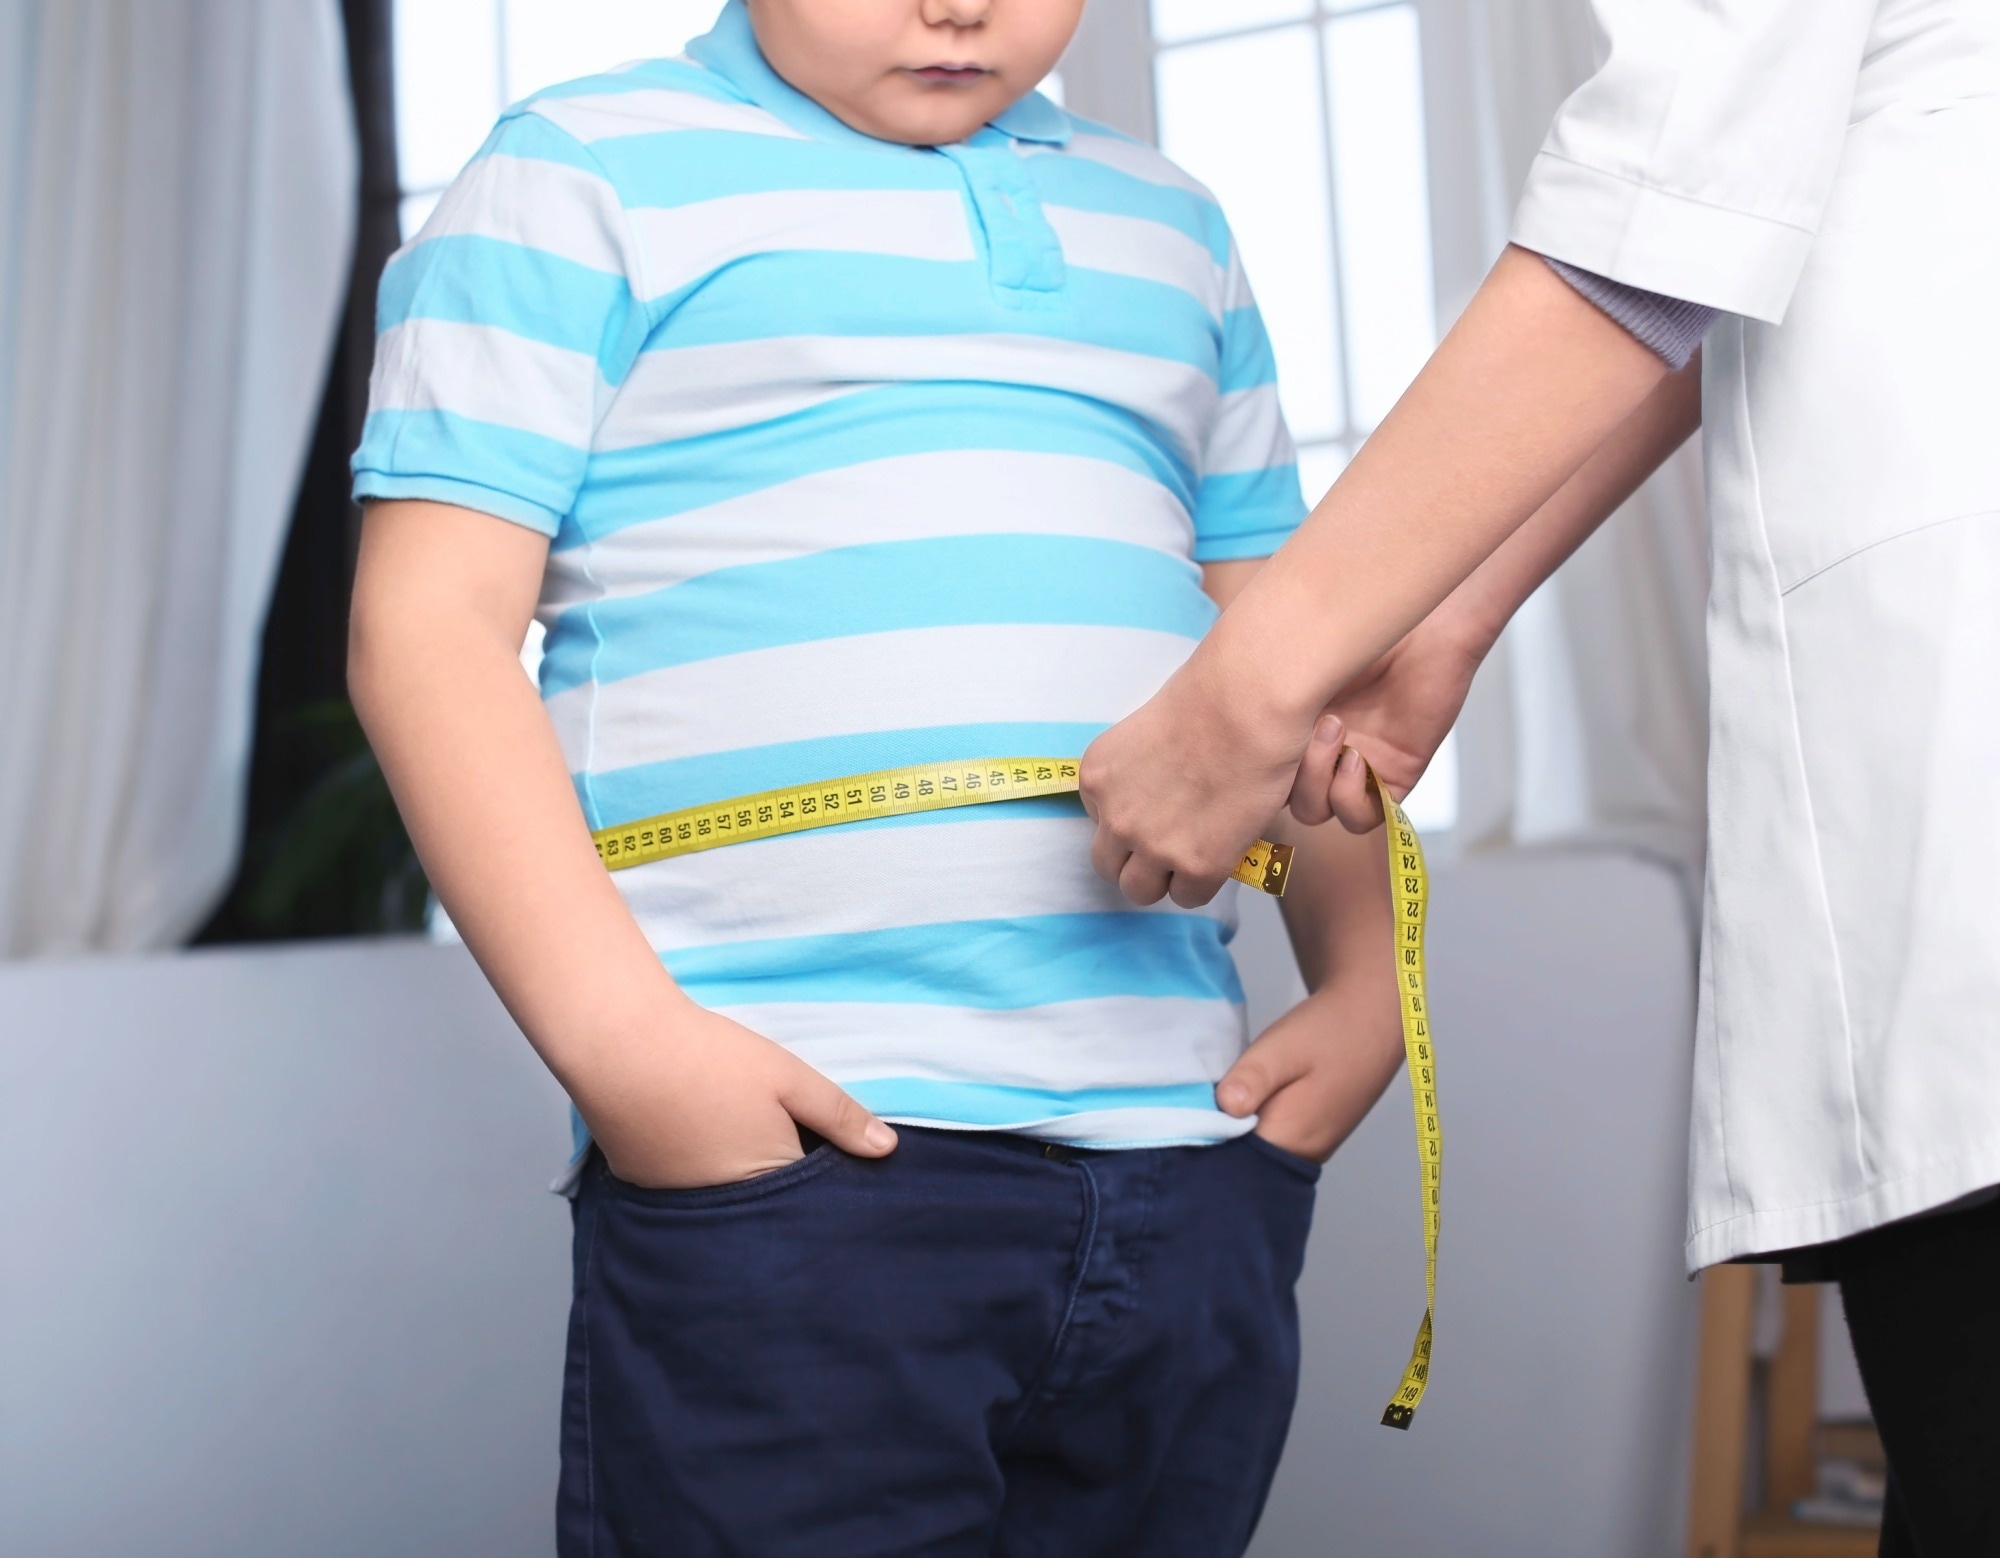 Study: Clinical Practice Guideline for the Evaluation and Treatment of Children and Adolescents With Obesity. Image Credit: Africa Studio/Shutterstock